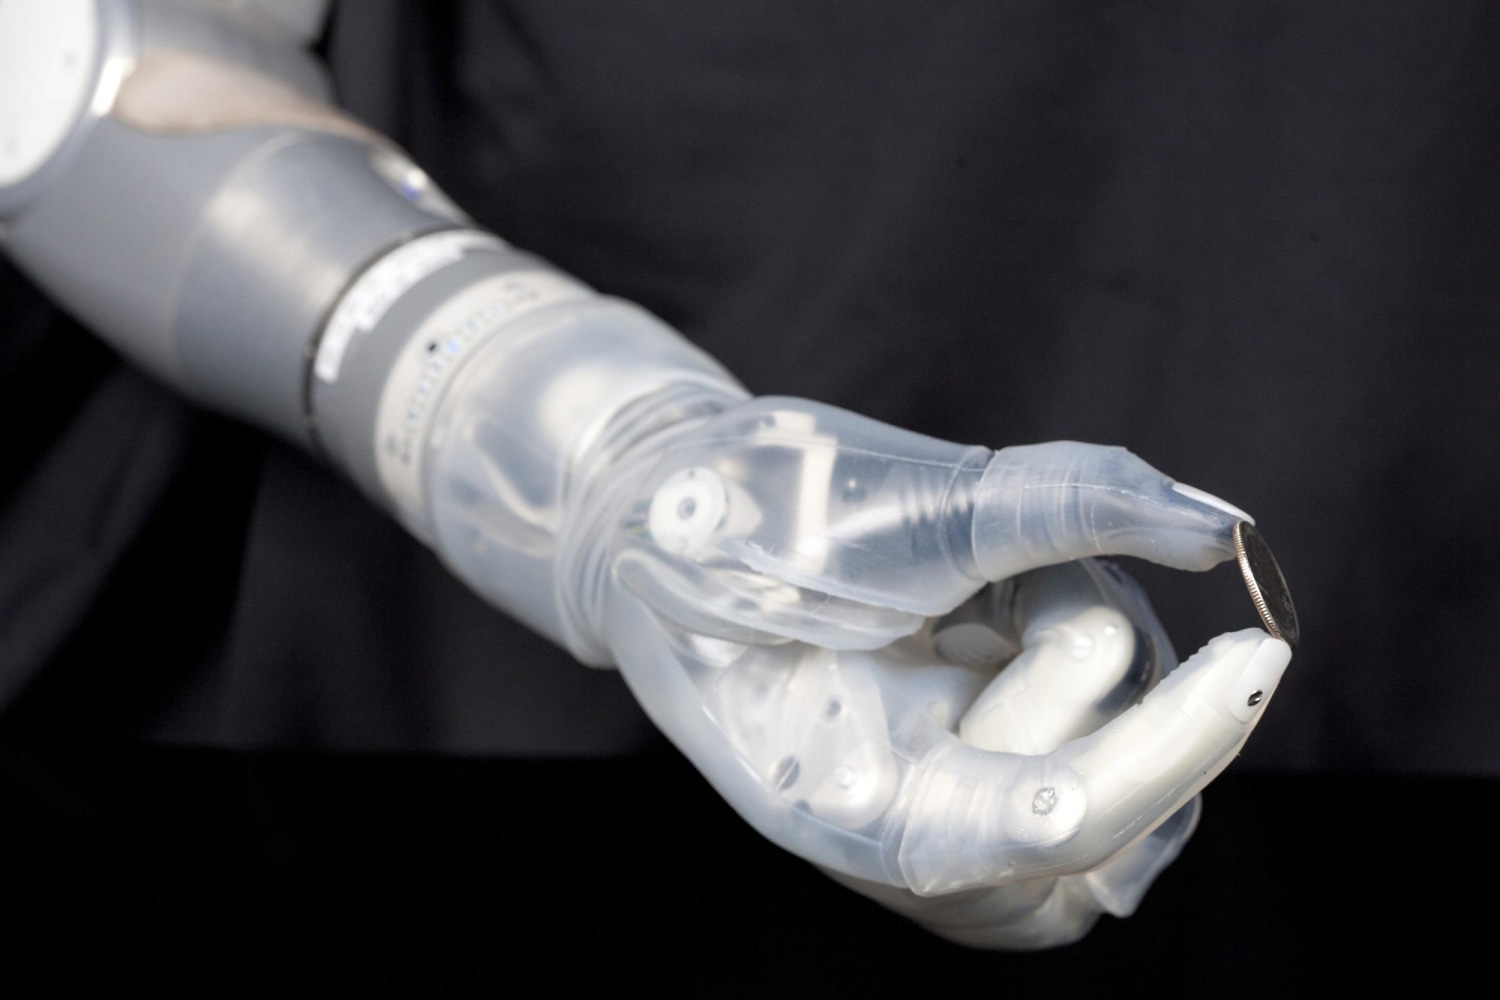 FDA Approves 'Star Wars' Robotic Arm for Amputees